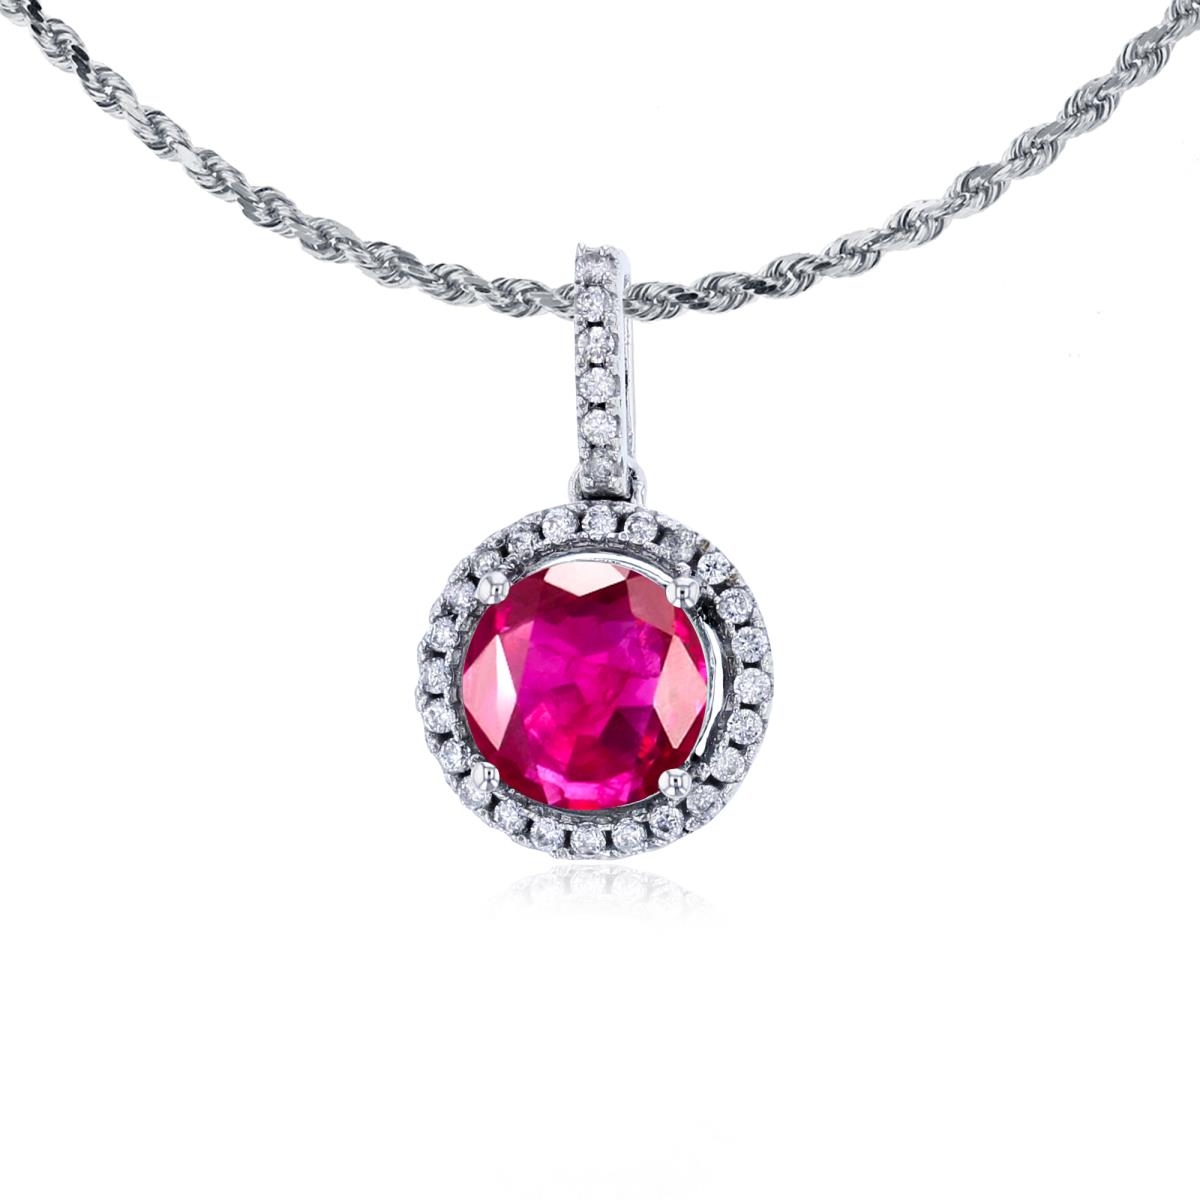 10K White Gold 7mm Round Glass Filled Ruby & 0.15 CTTW Round Diamonds Halo 18" Rope Chain Necklace